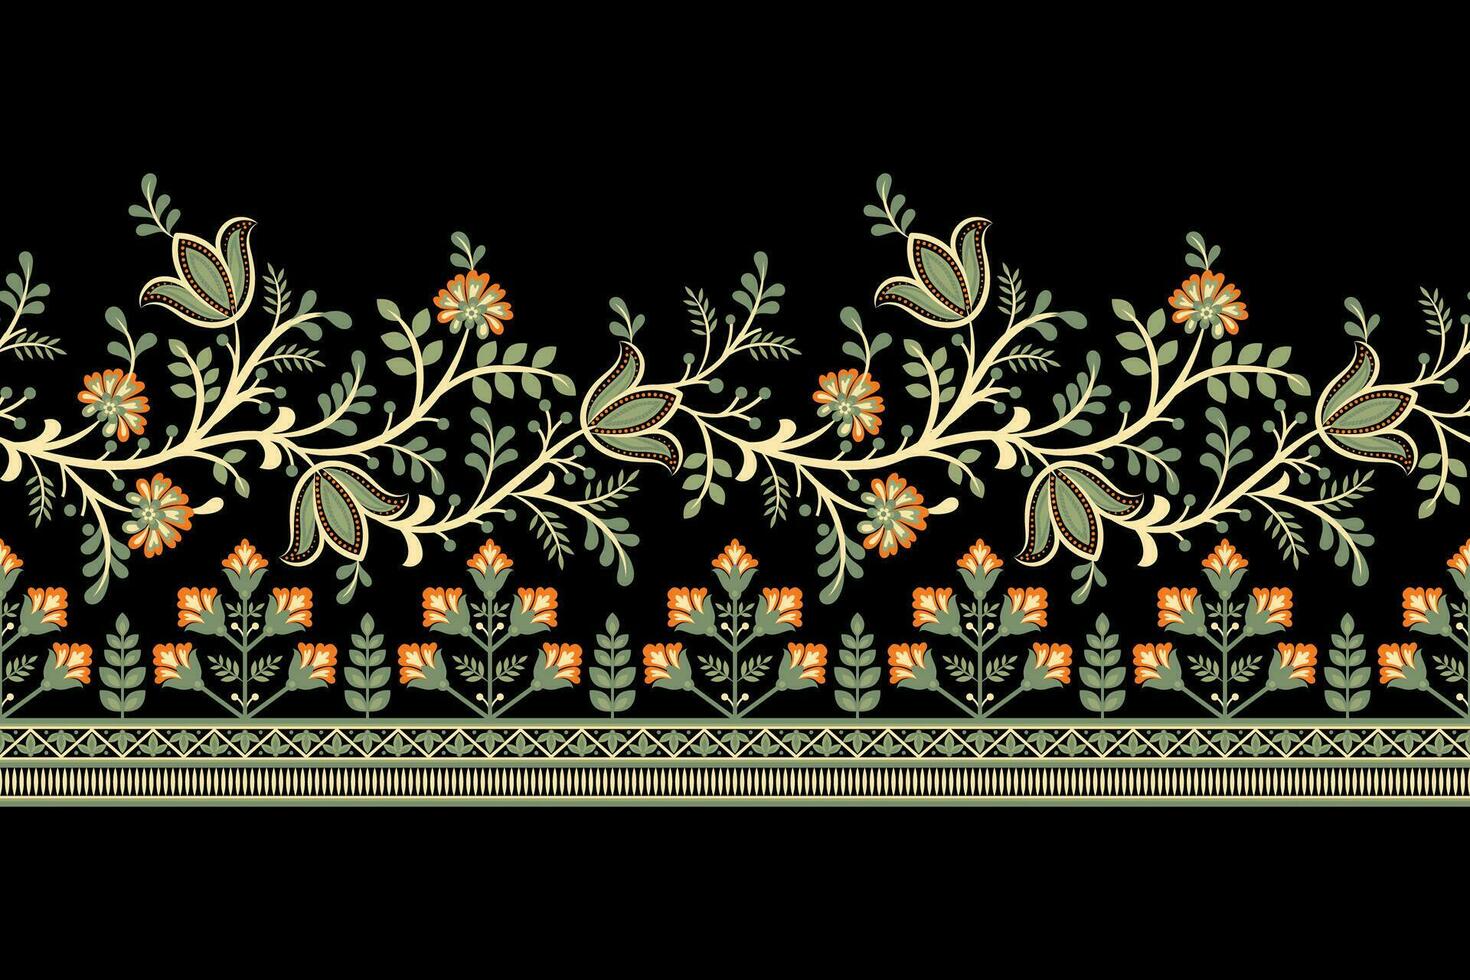 Ethnic Seamless borders and flower ornament motif draws working illustration flowers and  ornament motif design elements Neckline pattern lace embroidery textile floral vector